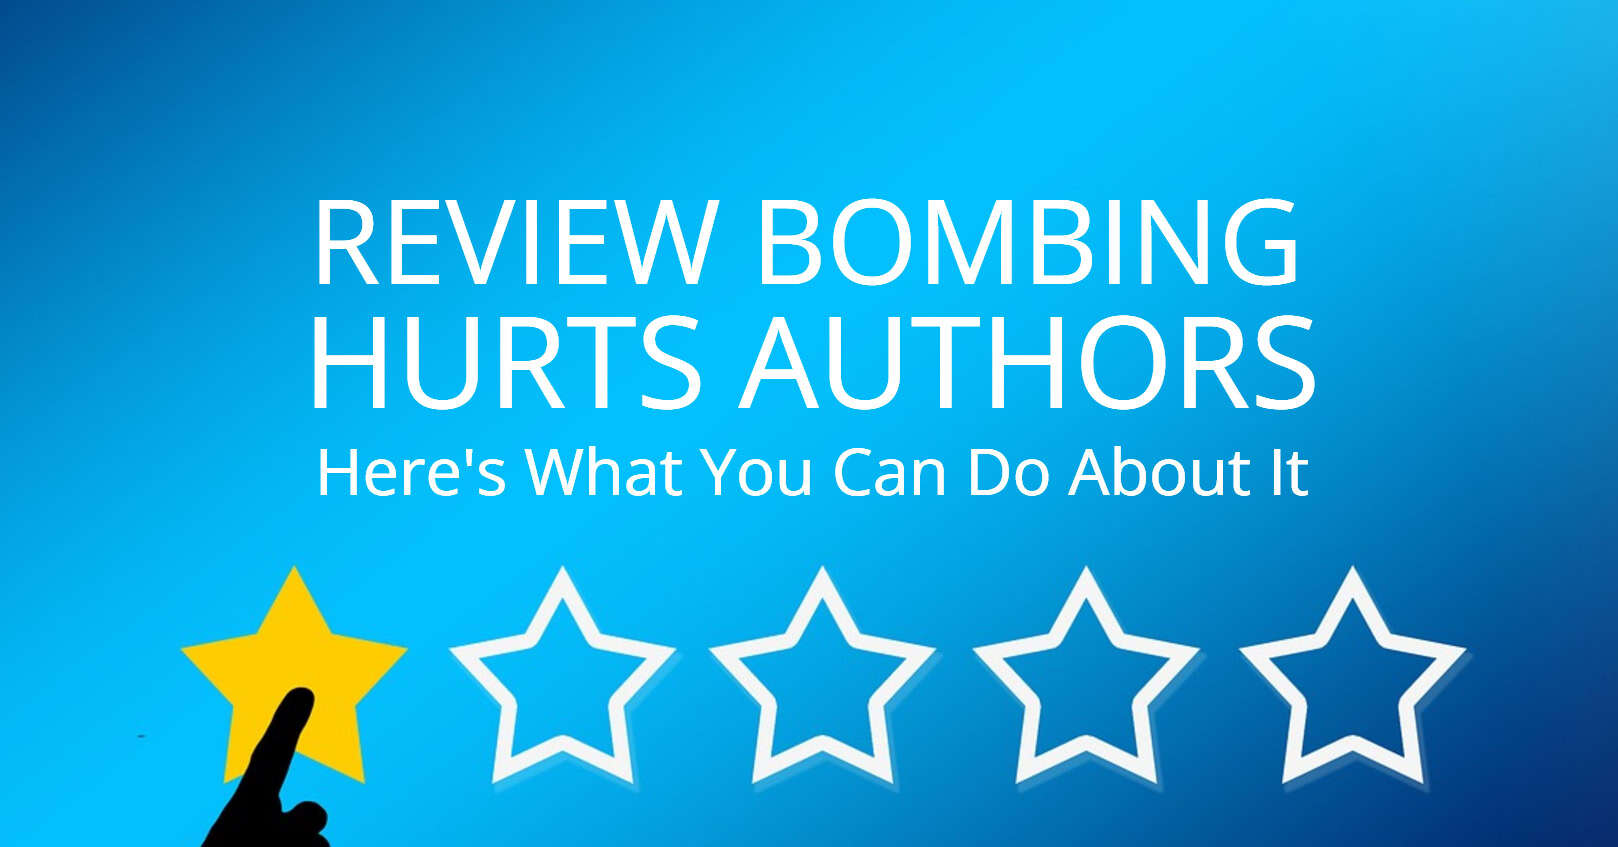 Review Bombing Hurts Authors